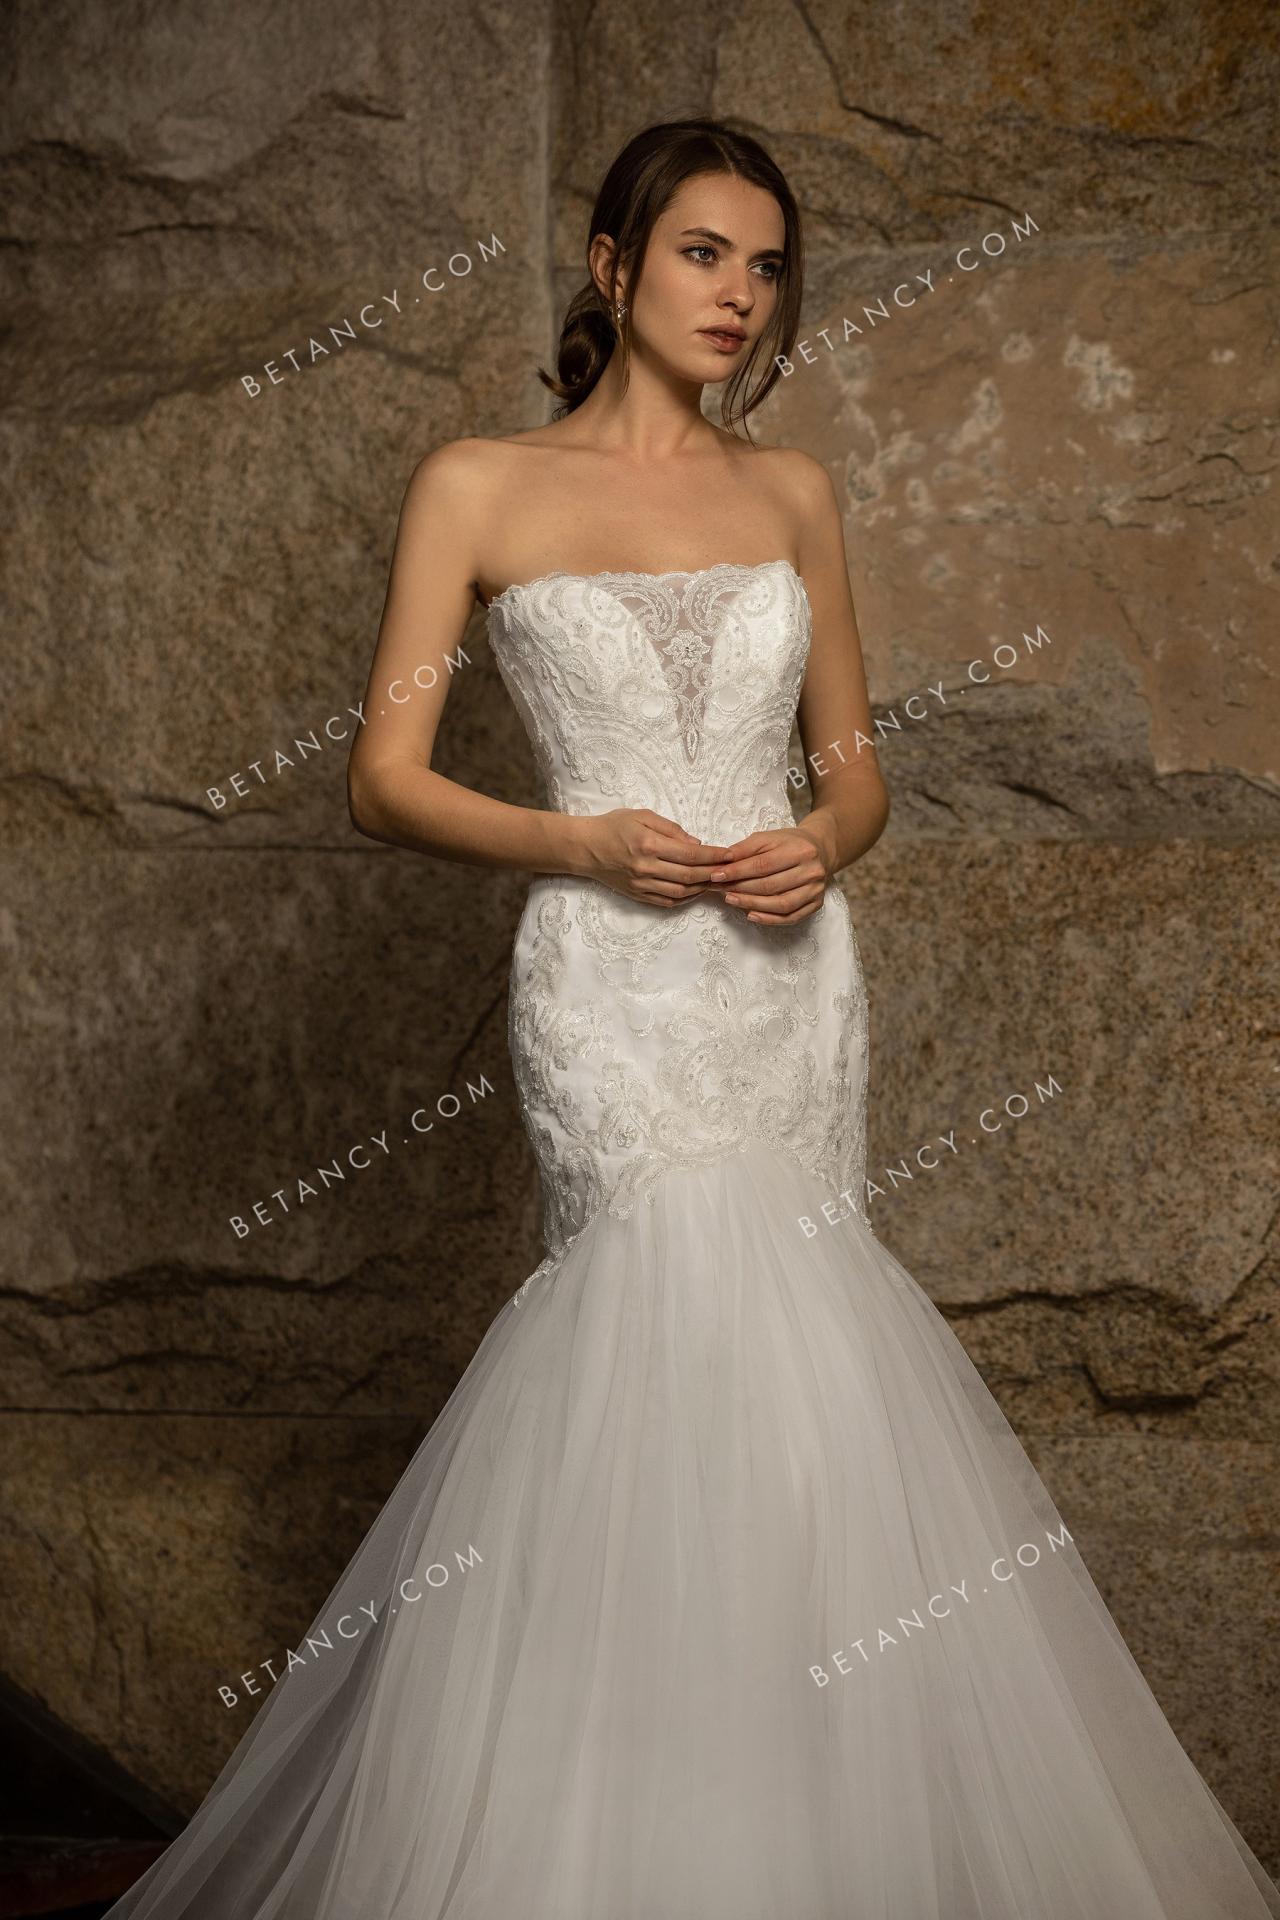 Strapless straight across neck wedding gown 2